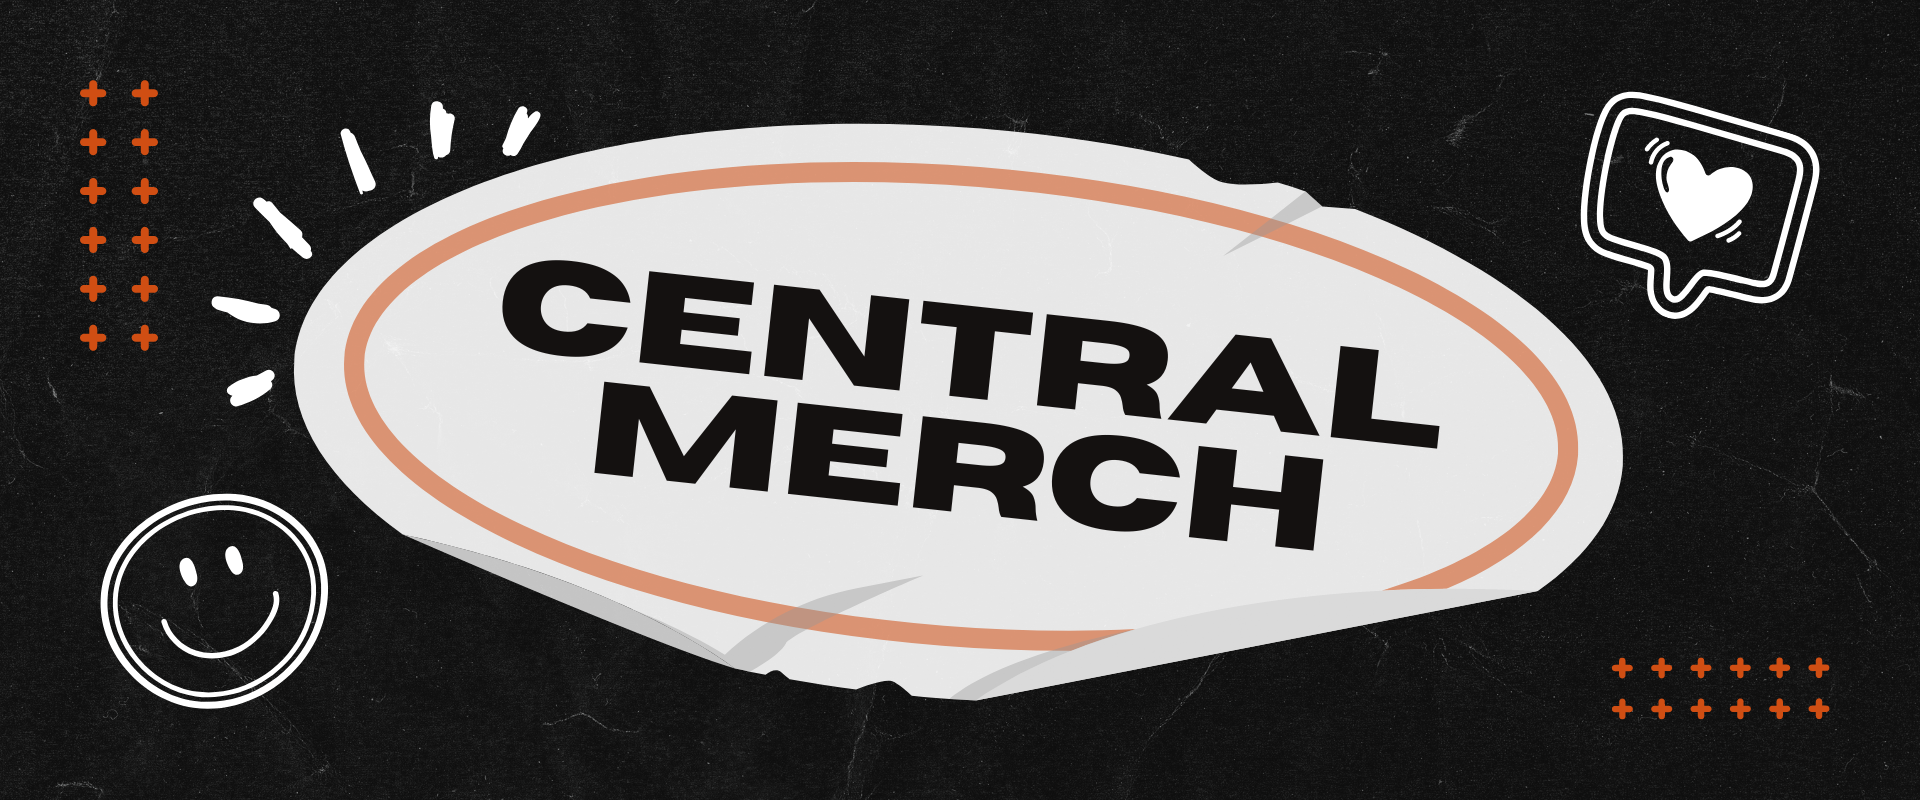 central merch store